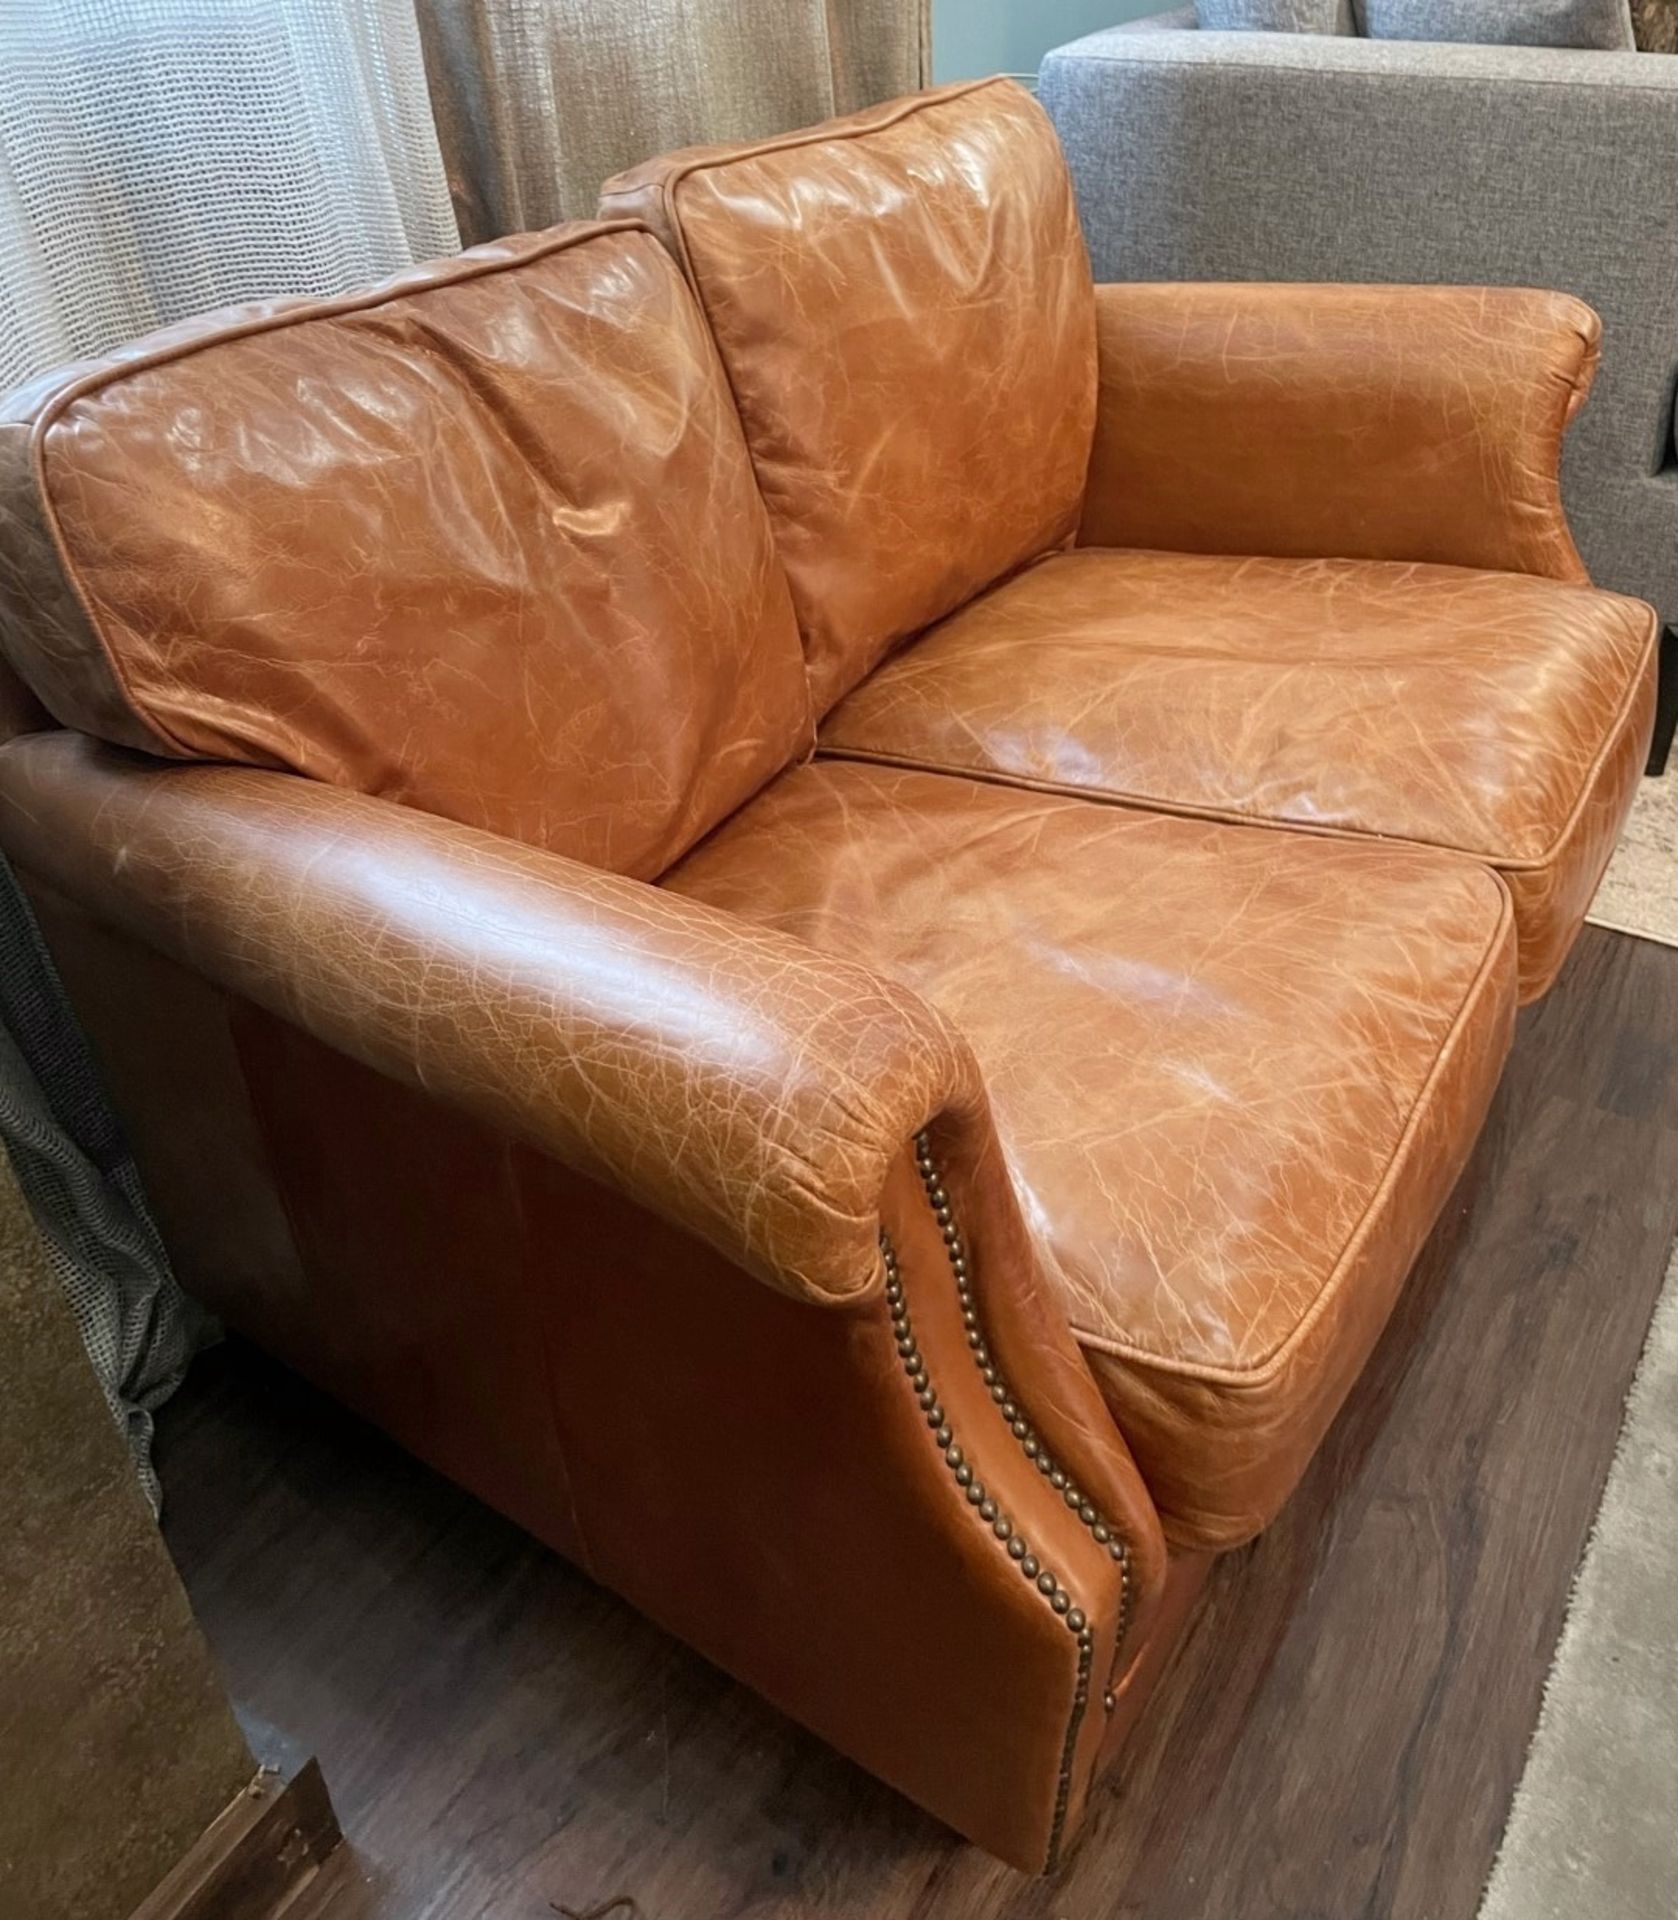 1 x Carlton Vintage Tan Leather Upholstered 2-Seater Sofa - Recently Removed from a Luxury Furniture - Image 2 of 8